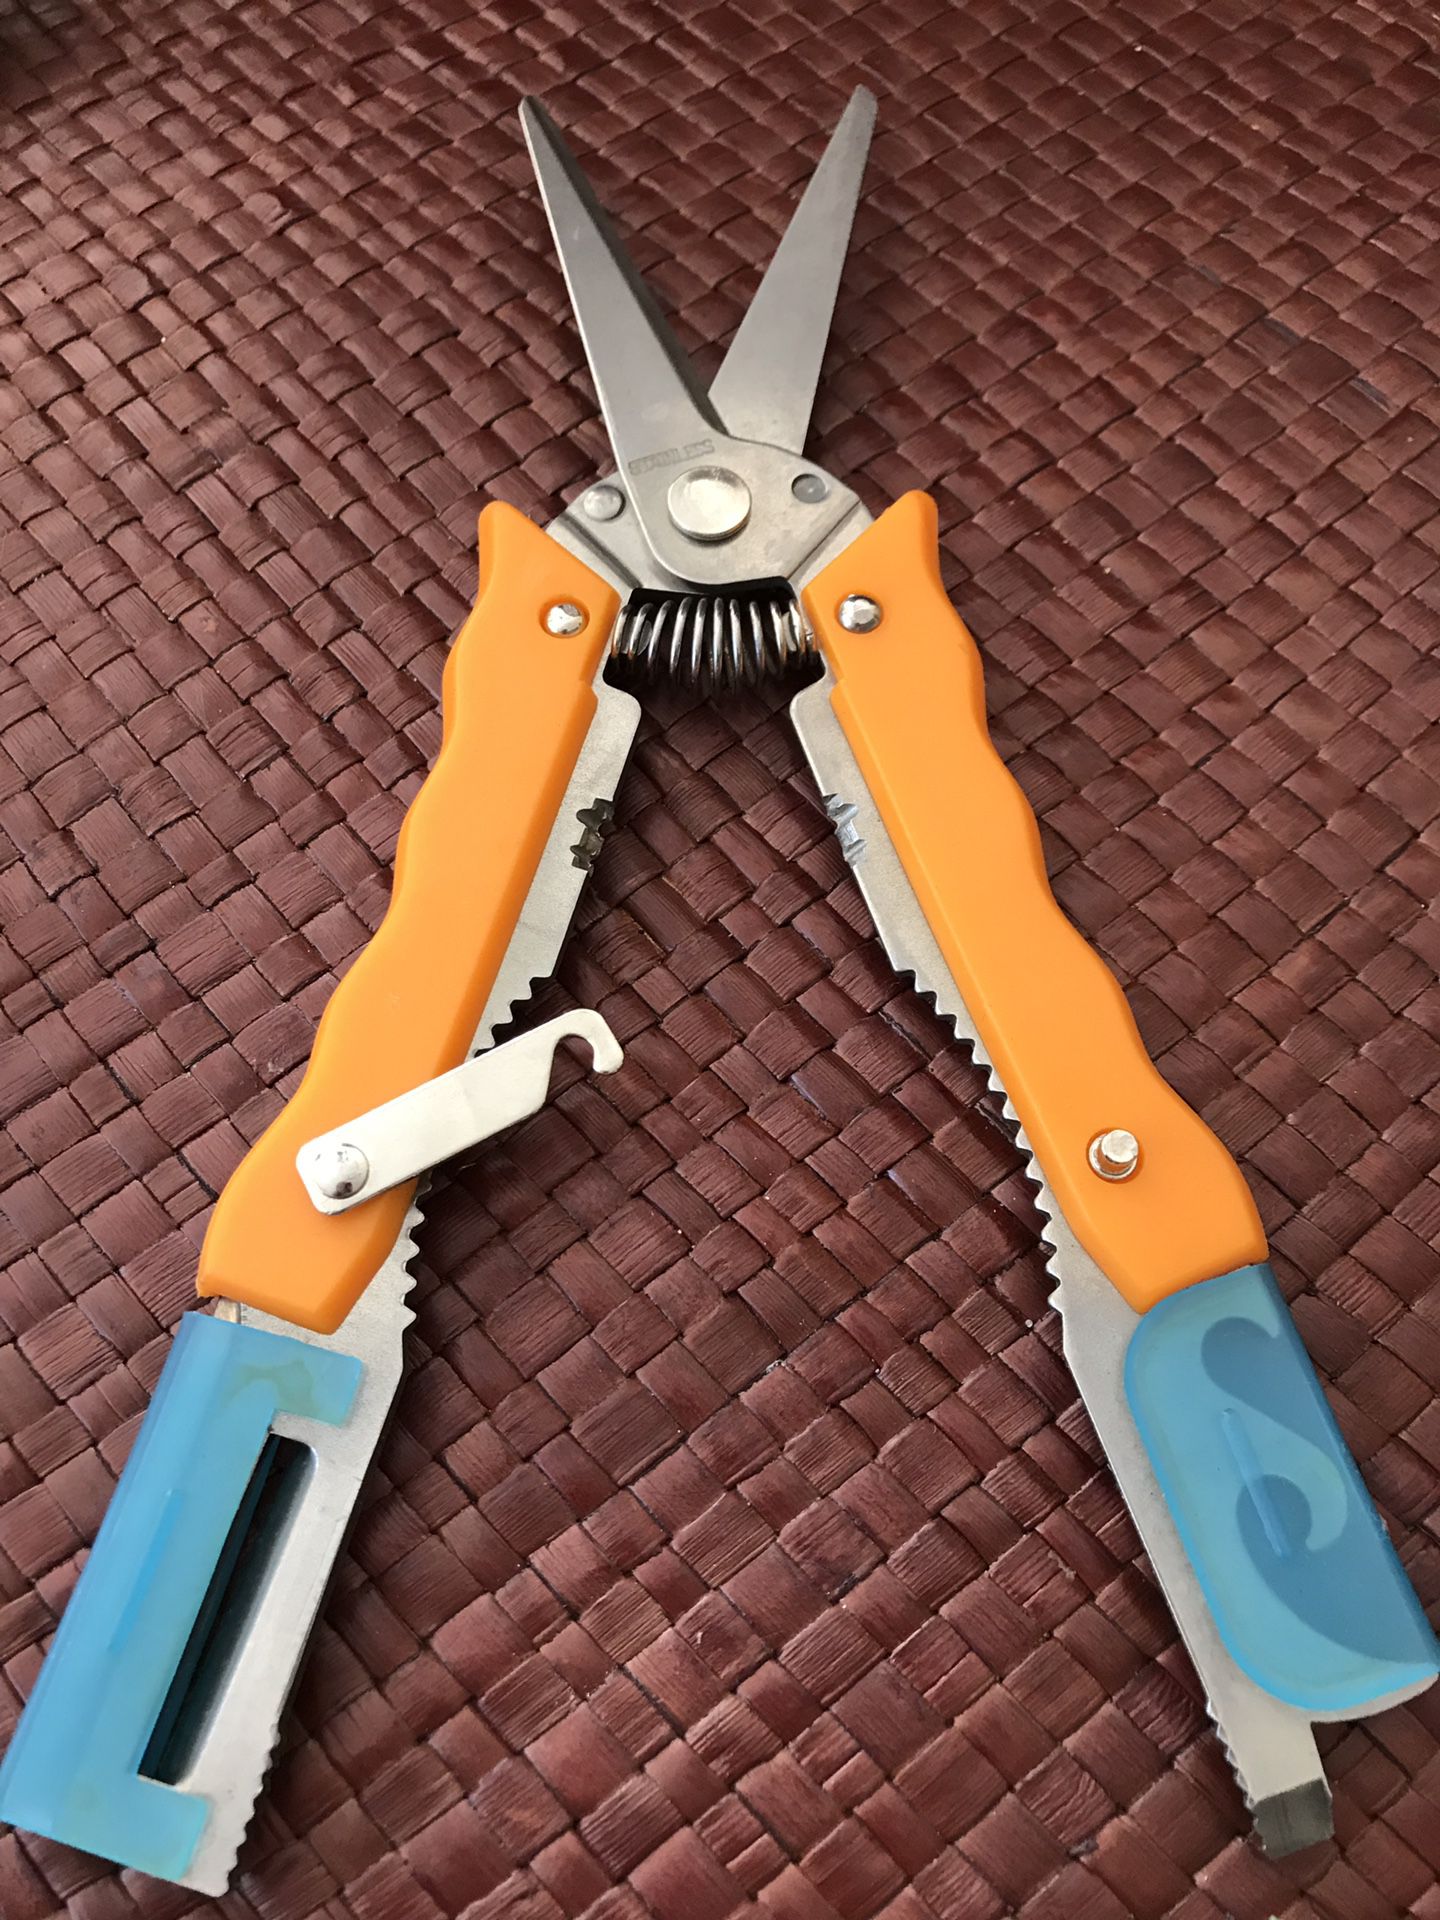 New stainless steel shears with many uses